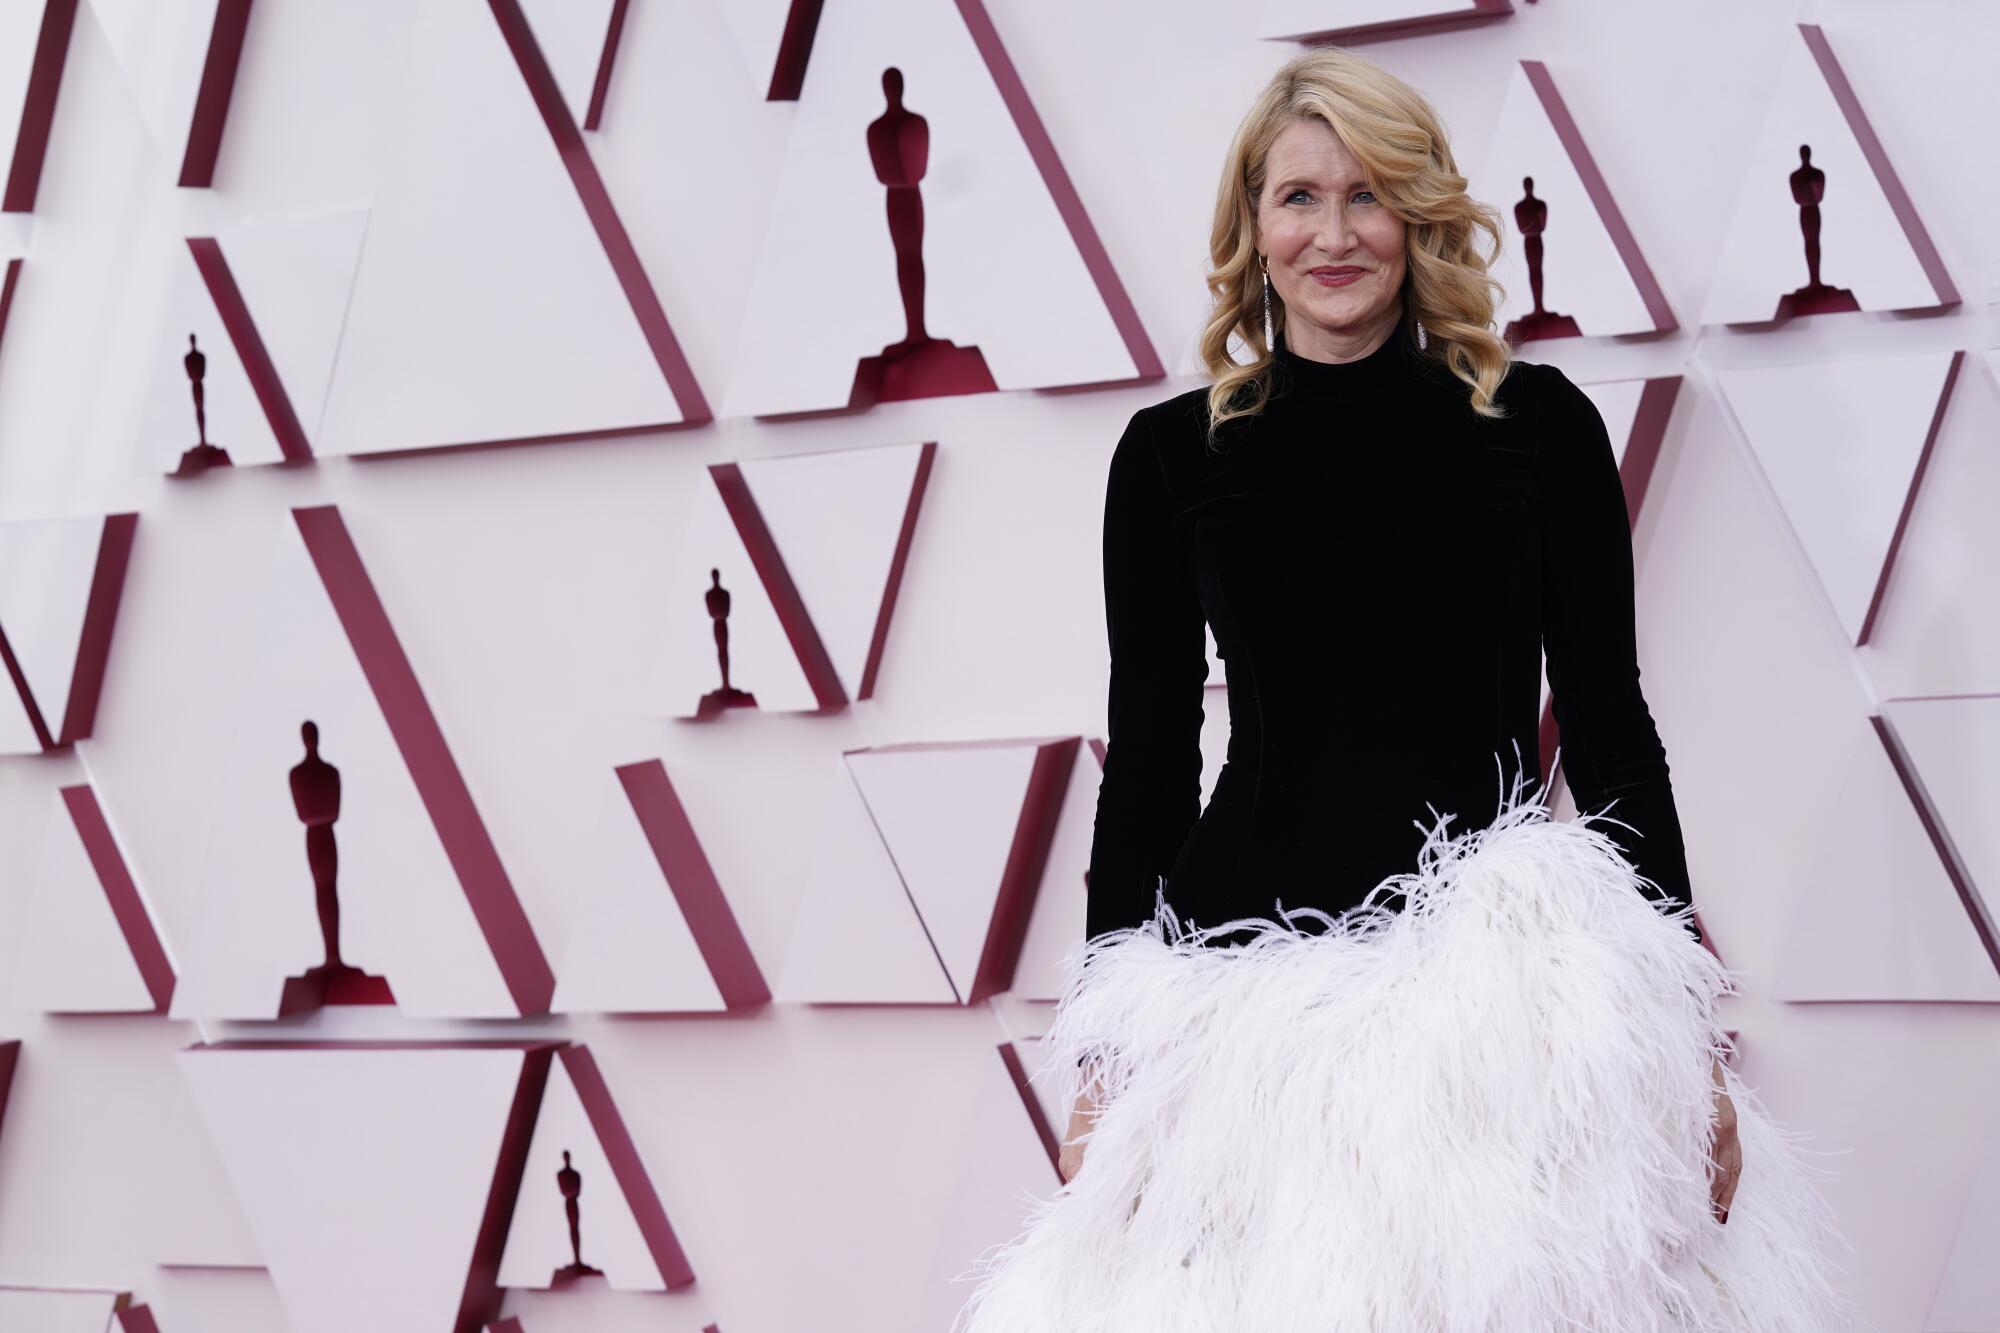 Laura Dern wears a dress with a black turtleneck top and white feathery skirt